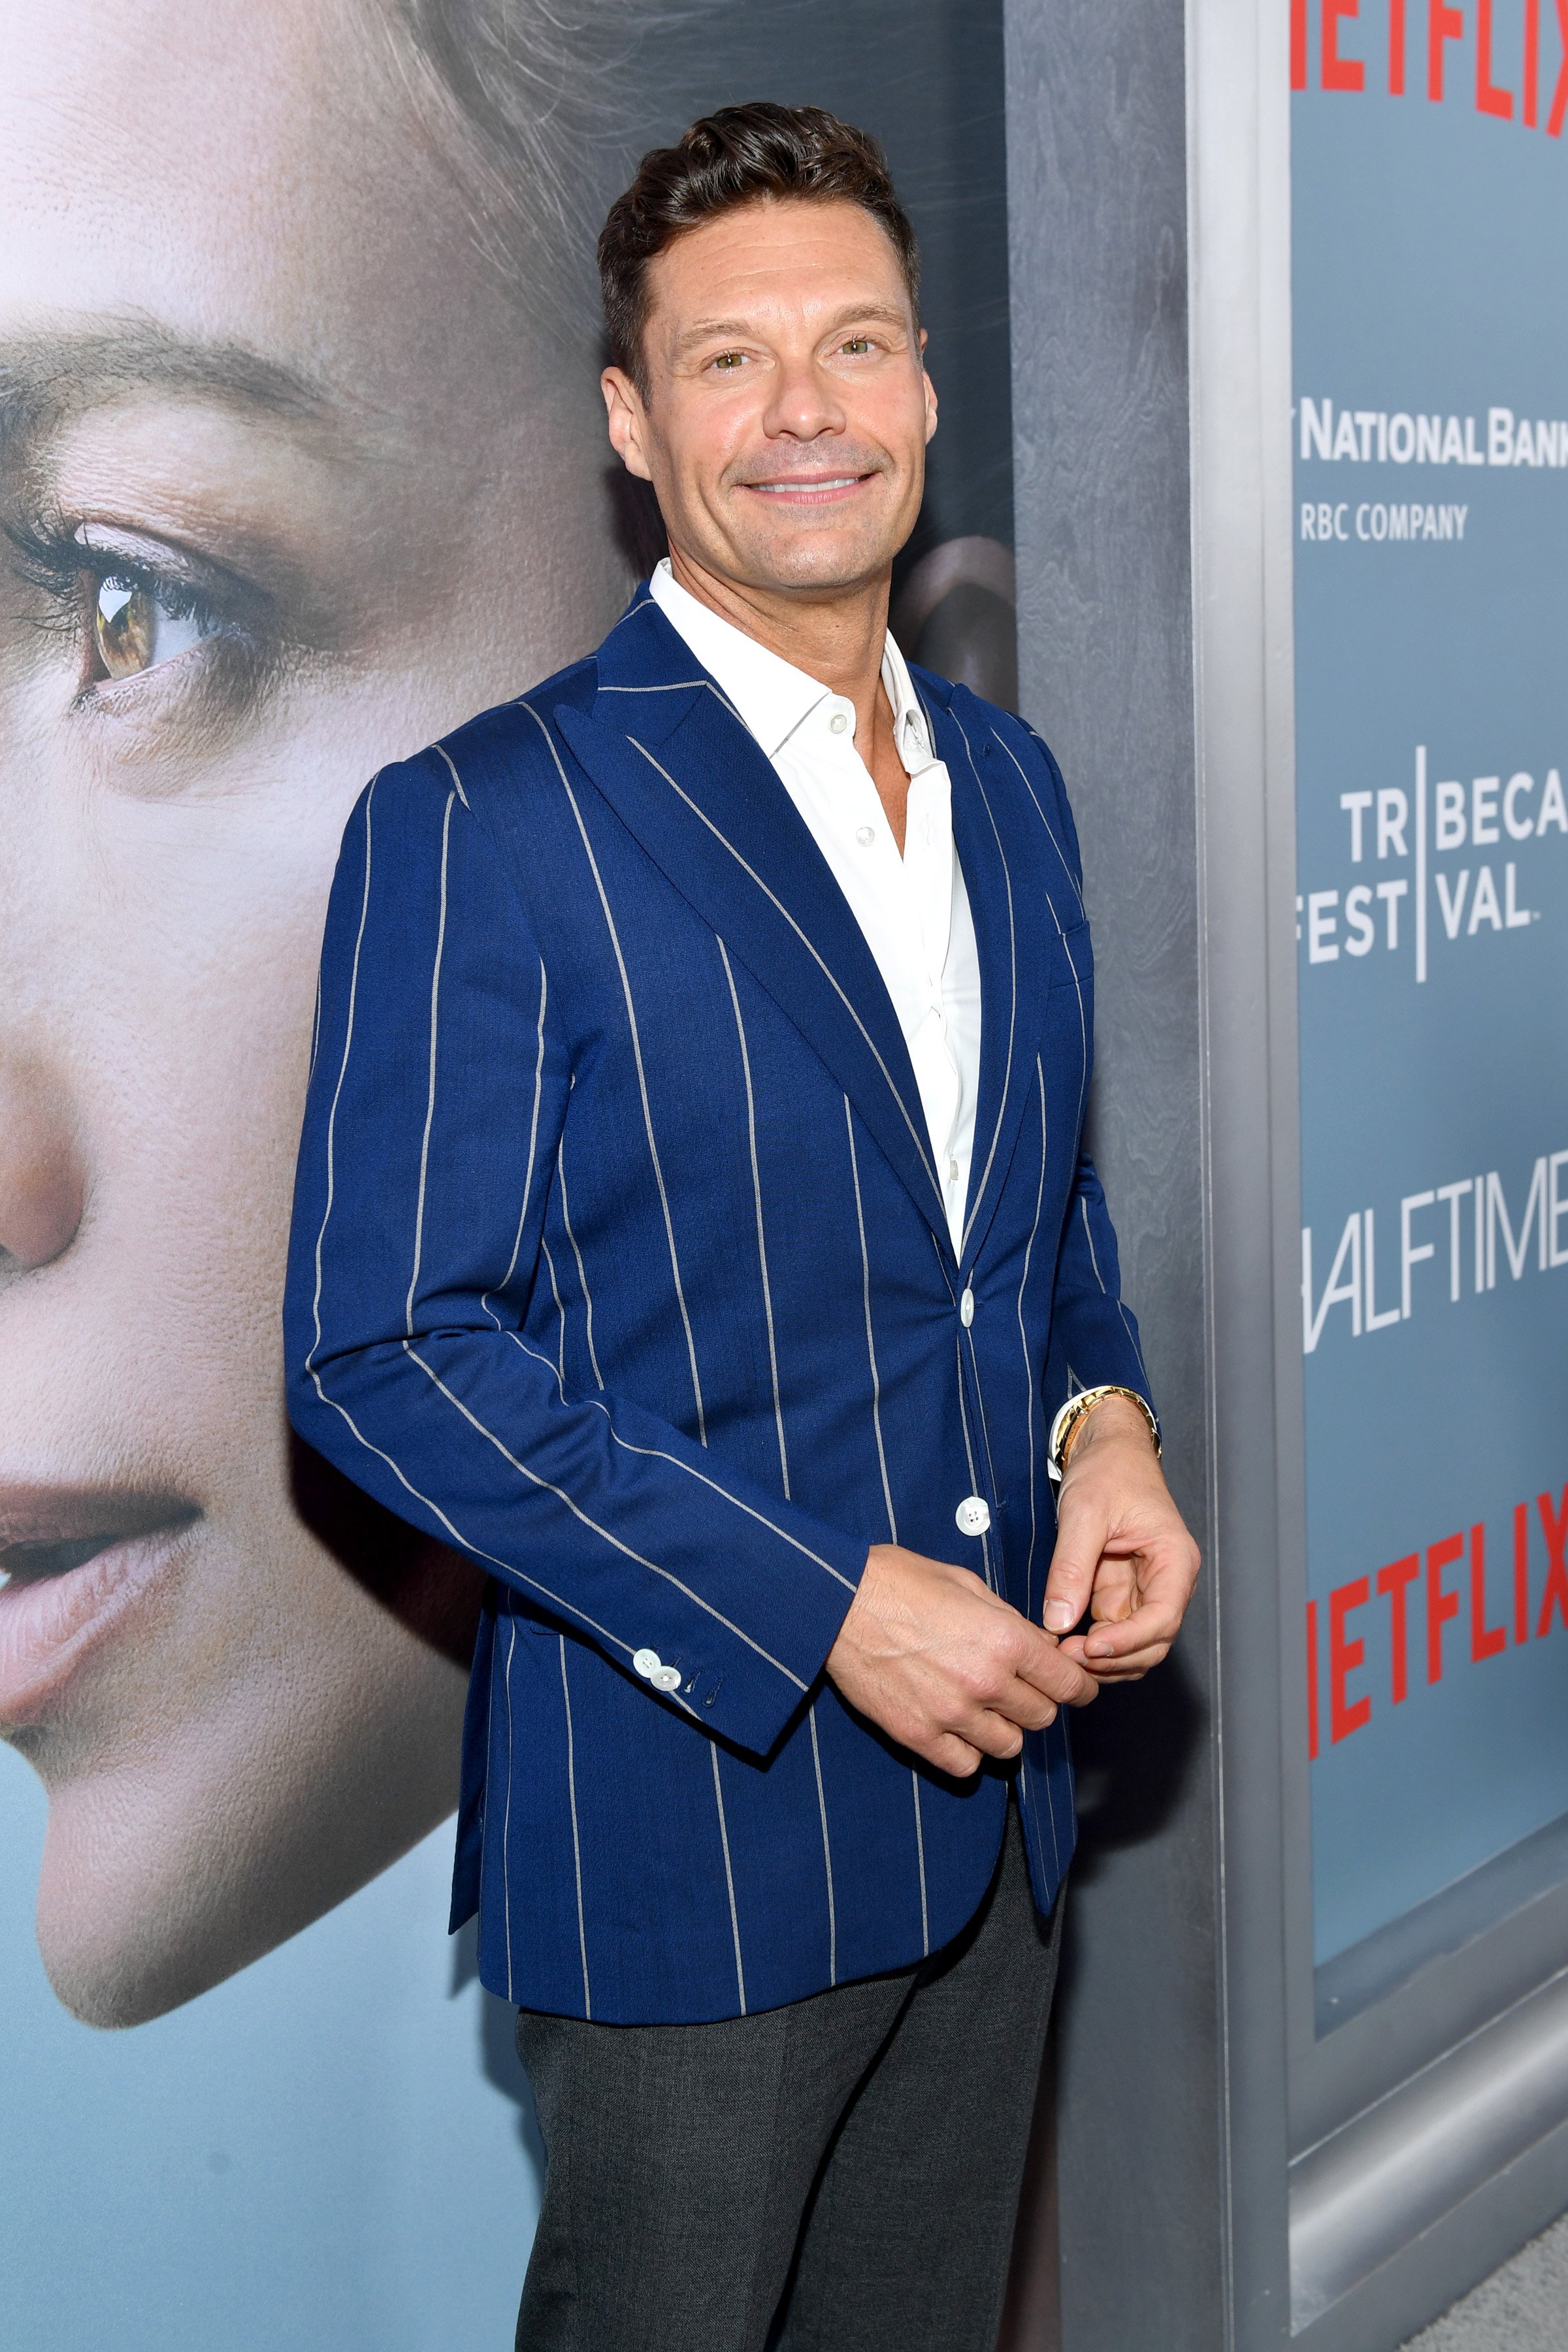 Ryan Seacrest attends the Tribeca Festival Opening Night & World Premiere of Netflix's Halftime on June 08, 2022 in New York City. | Source: Getty Images